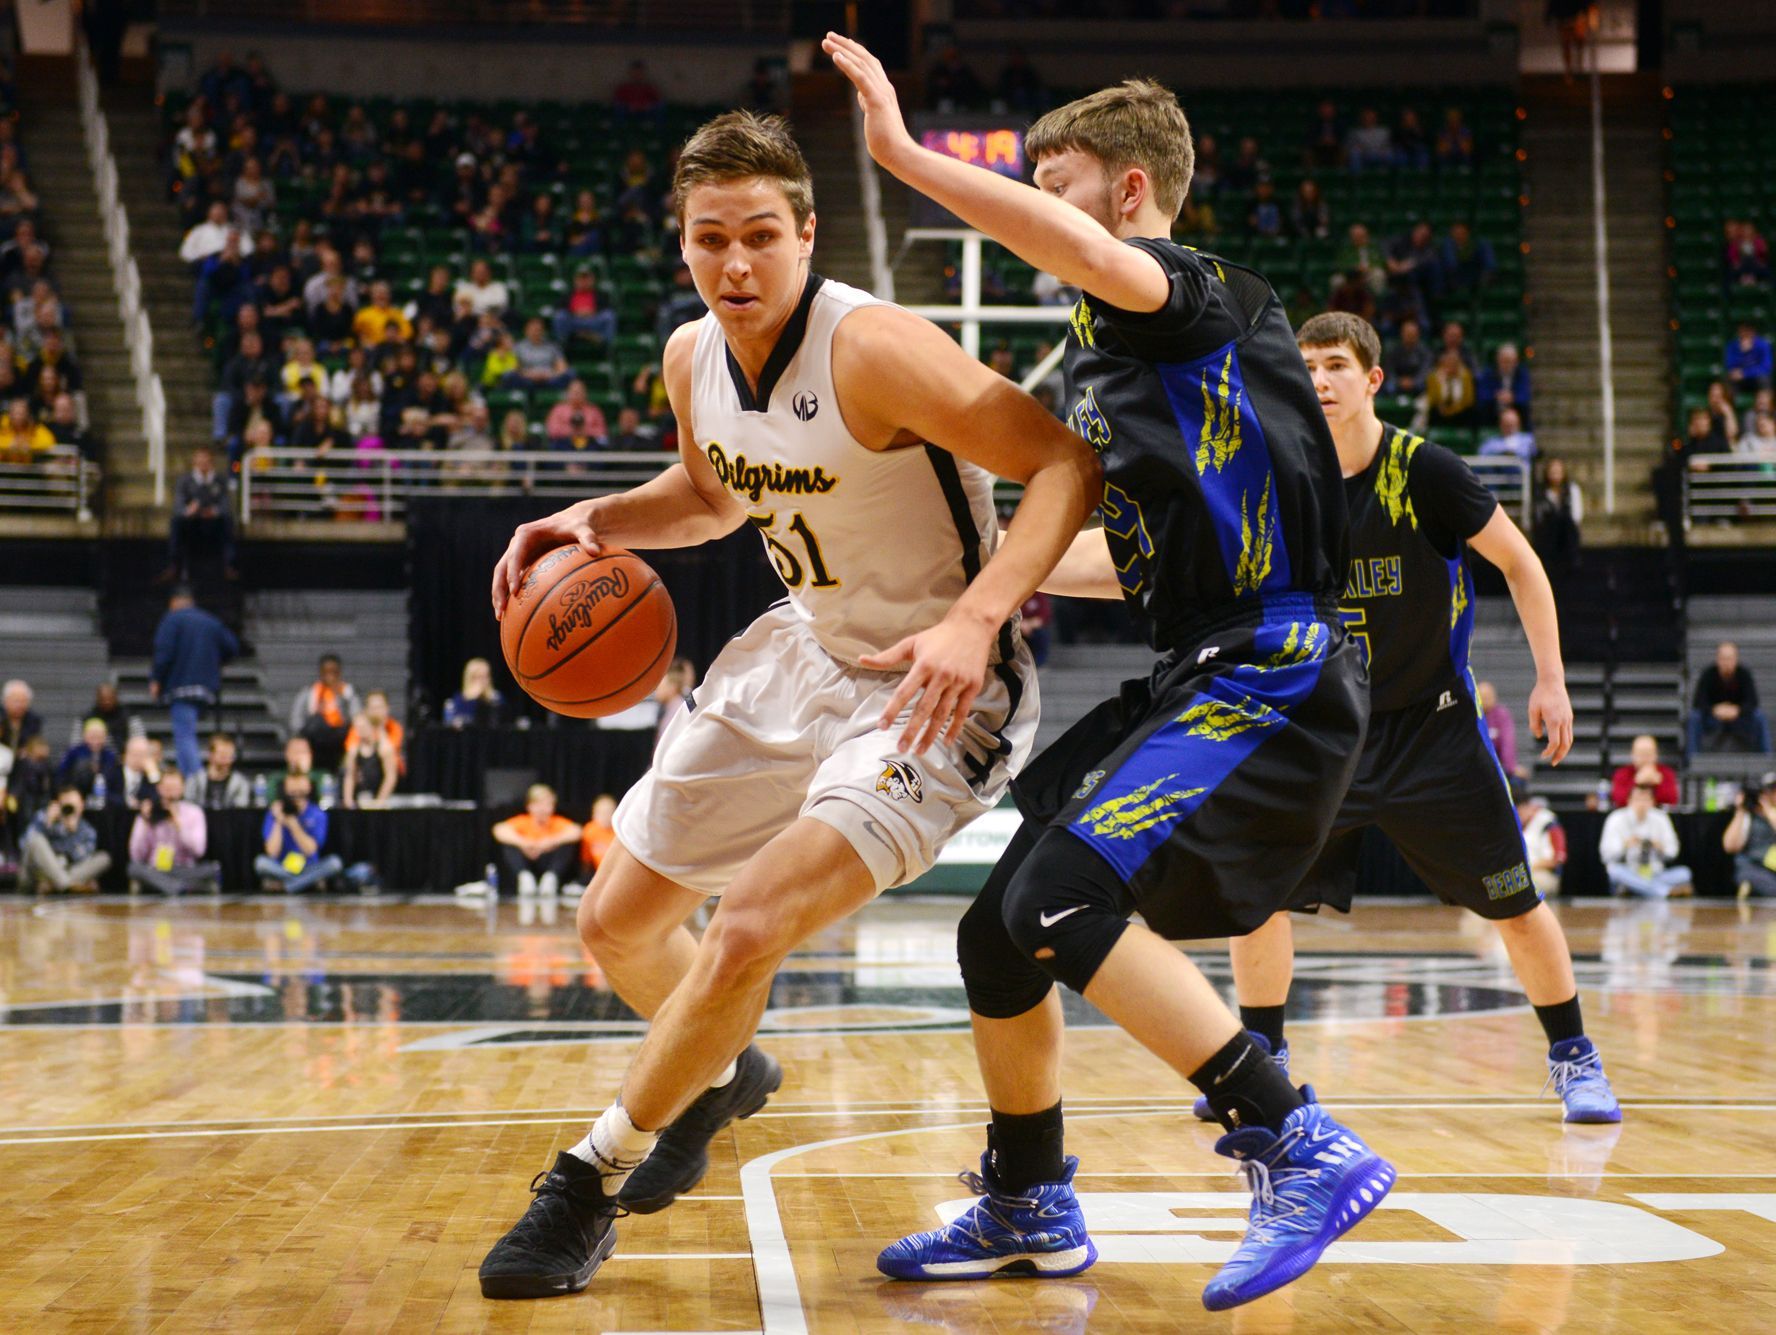 Lansing Christian's Preston Granger tries to dribble past Buckley's Brock Beeman during the state semifinal against Buckley on Thursday, March 23, 2017 at the Breslin Center in East Lansing.